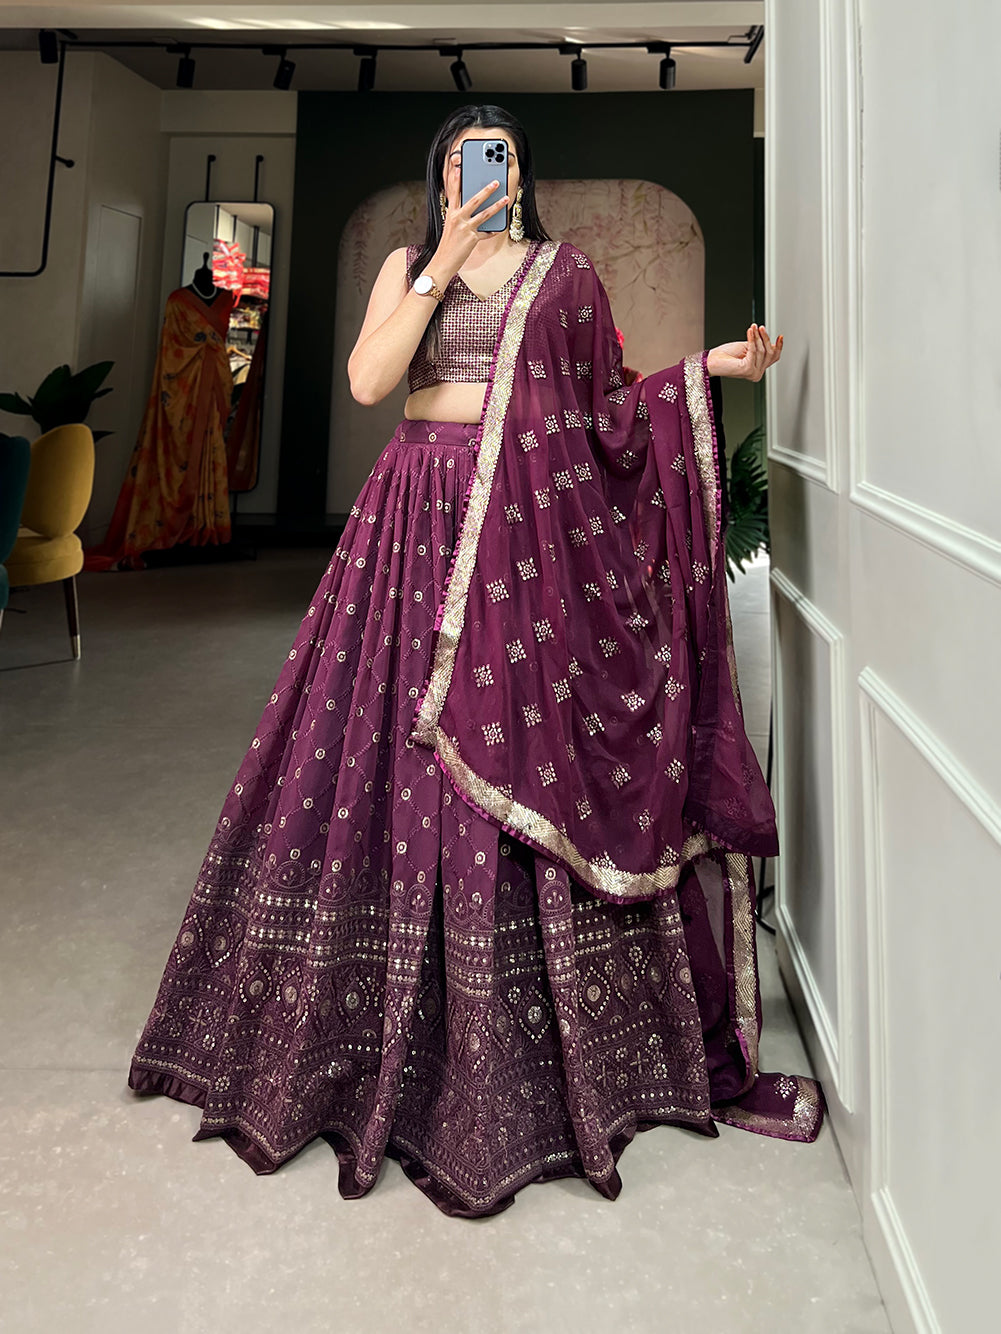 EXQUISITE LEHENGA CHOLI ADORNED WITH METICULOUS SEQUIN EMBROIDERY